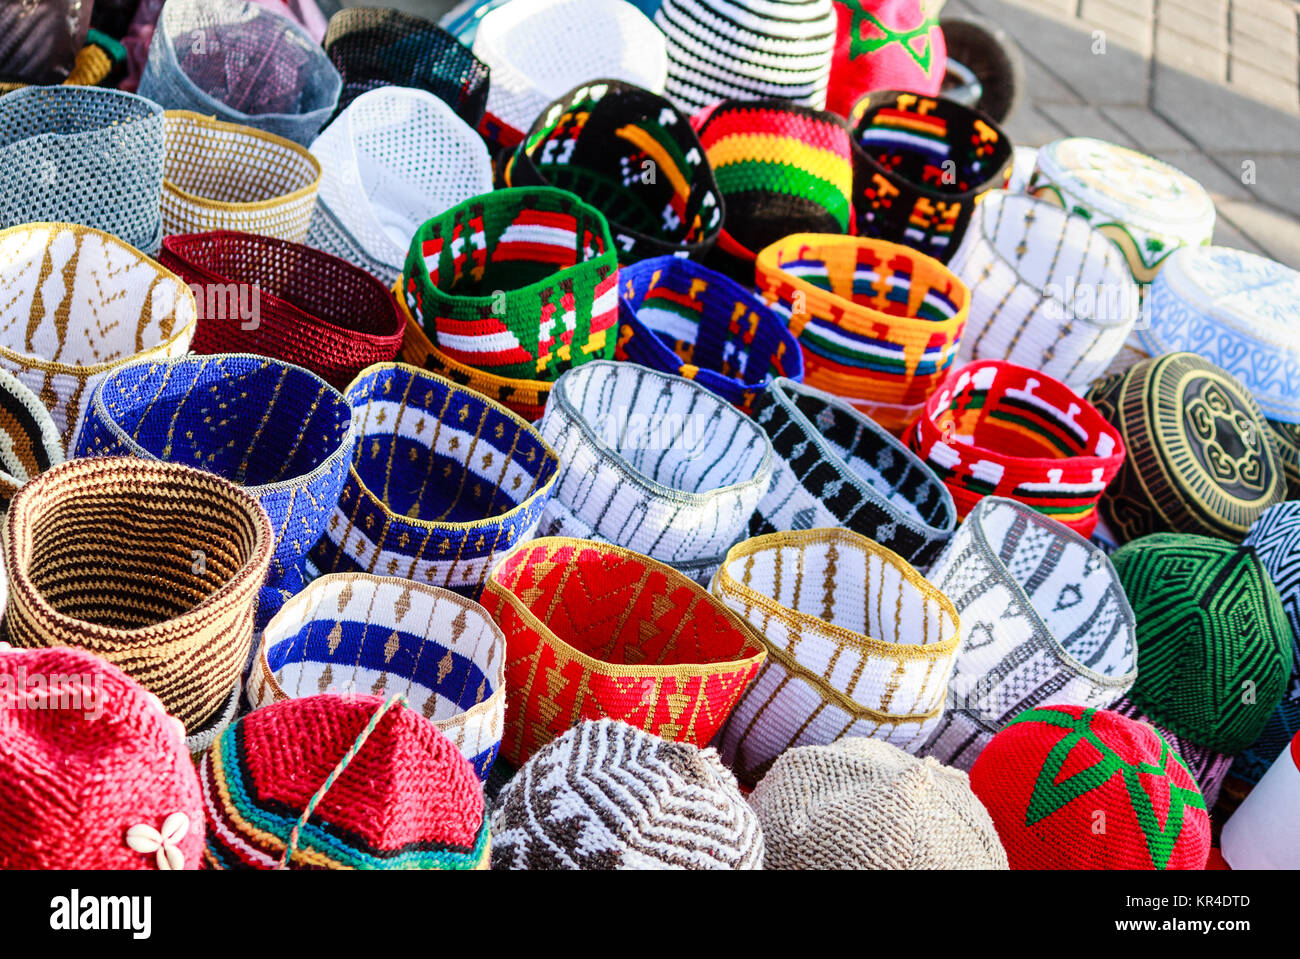 colorful moroccan hats Stock Photo